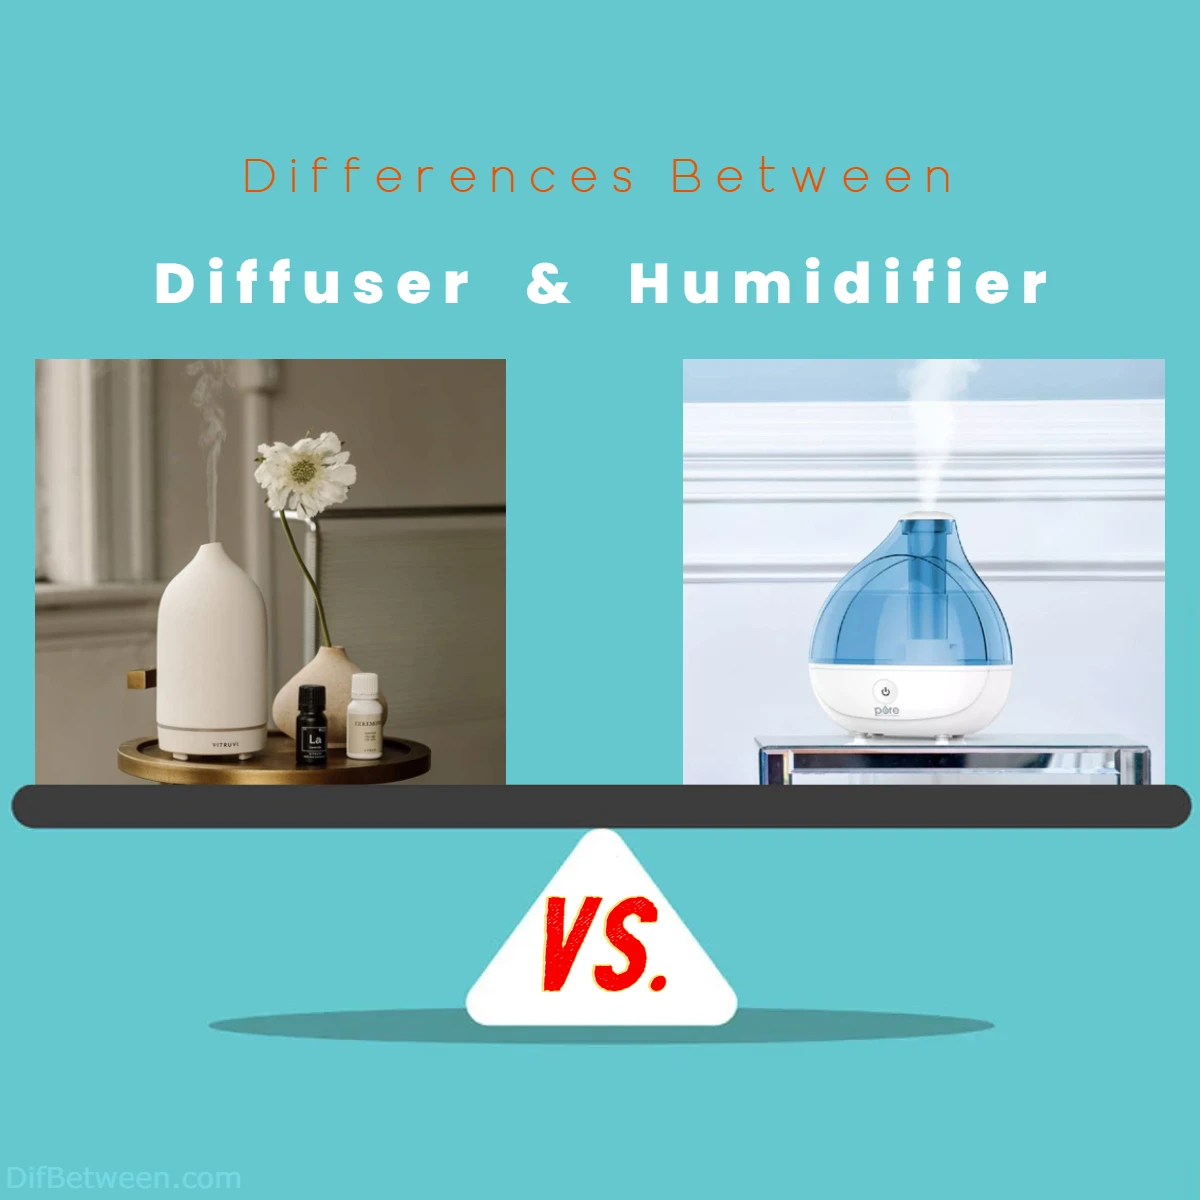 Differences Between Diffuser vs Humidifier